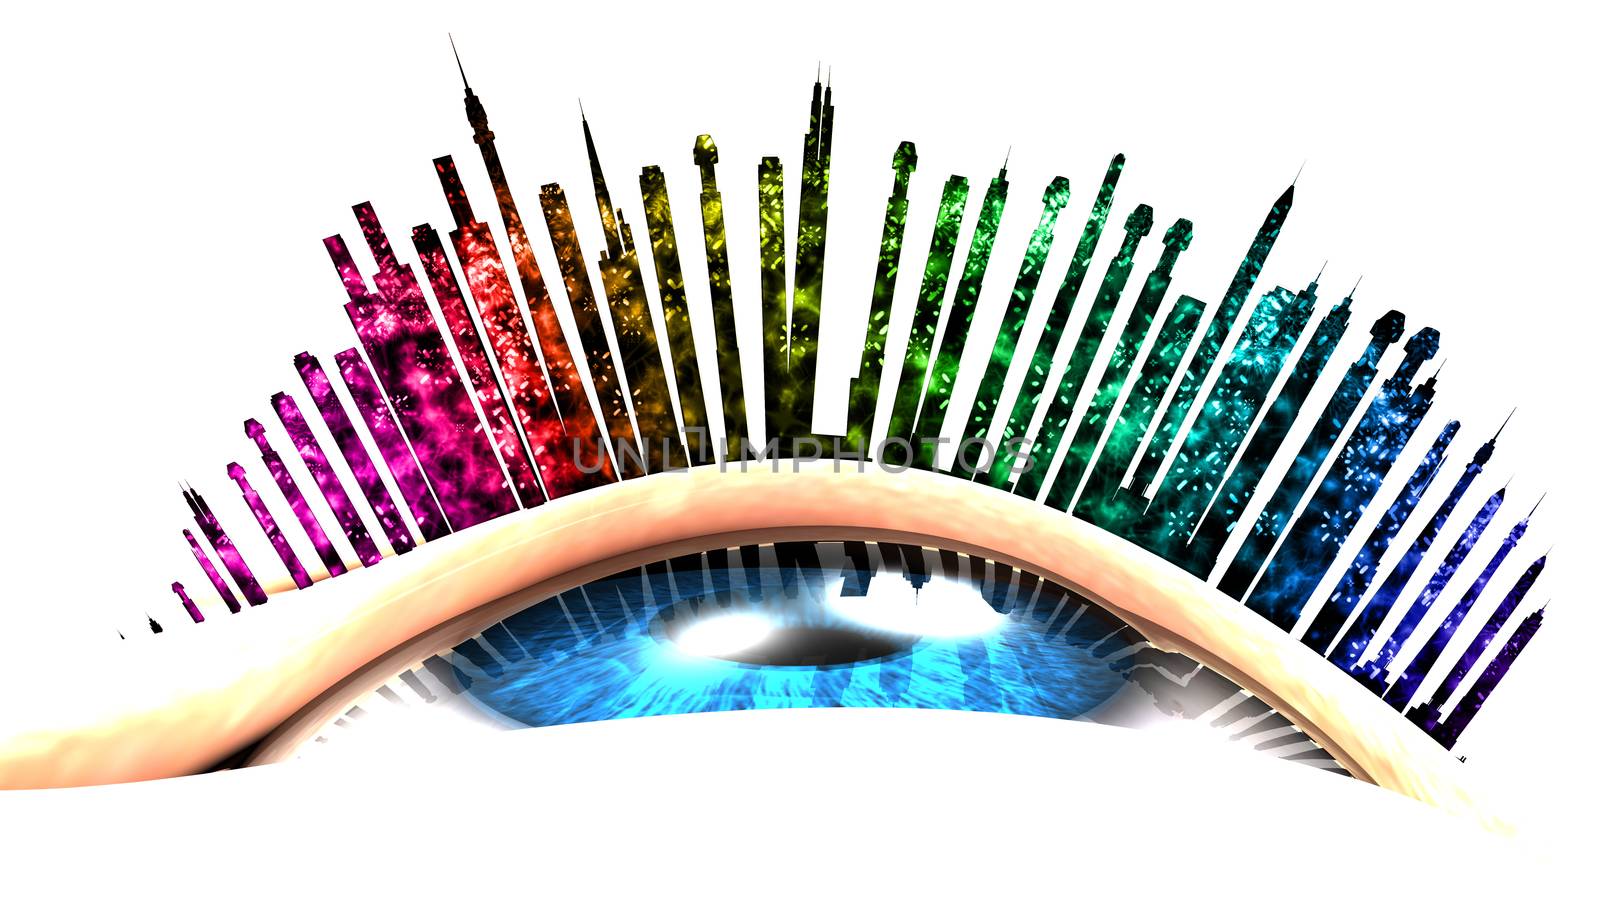 This illustration conceptualizes an urban vision with firework. The eye is looking up. The eyelashes are replaced with buildings.